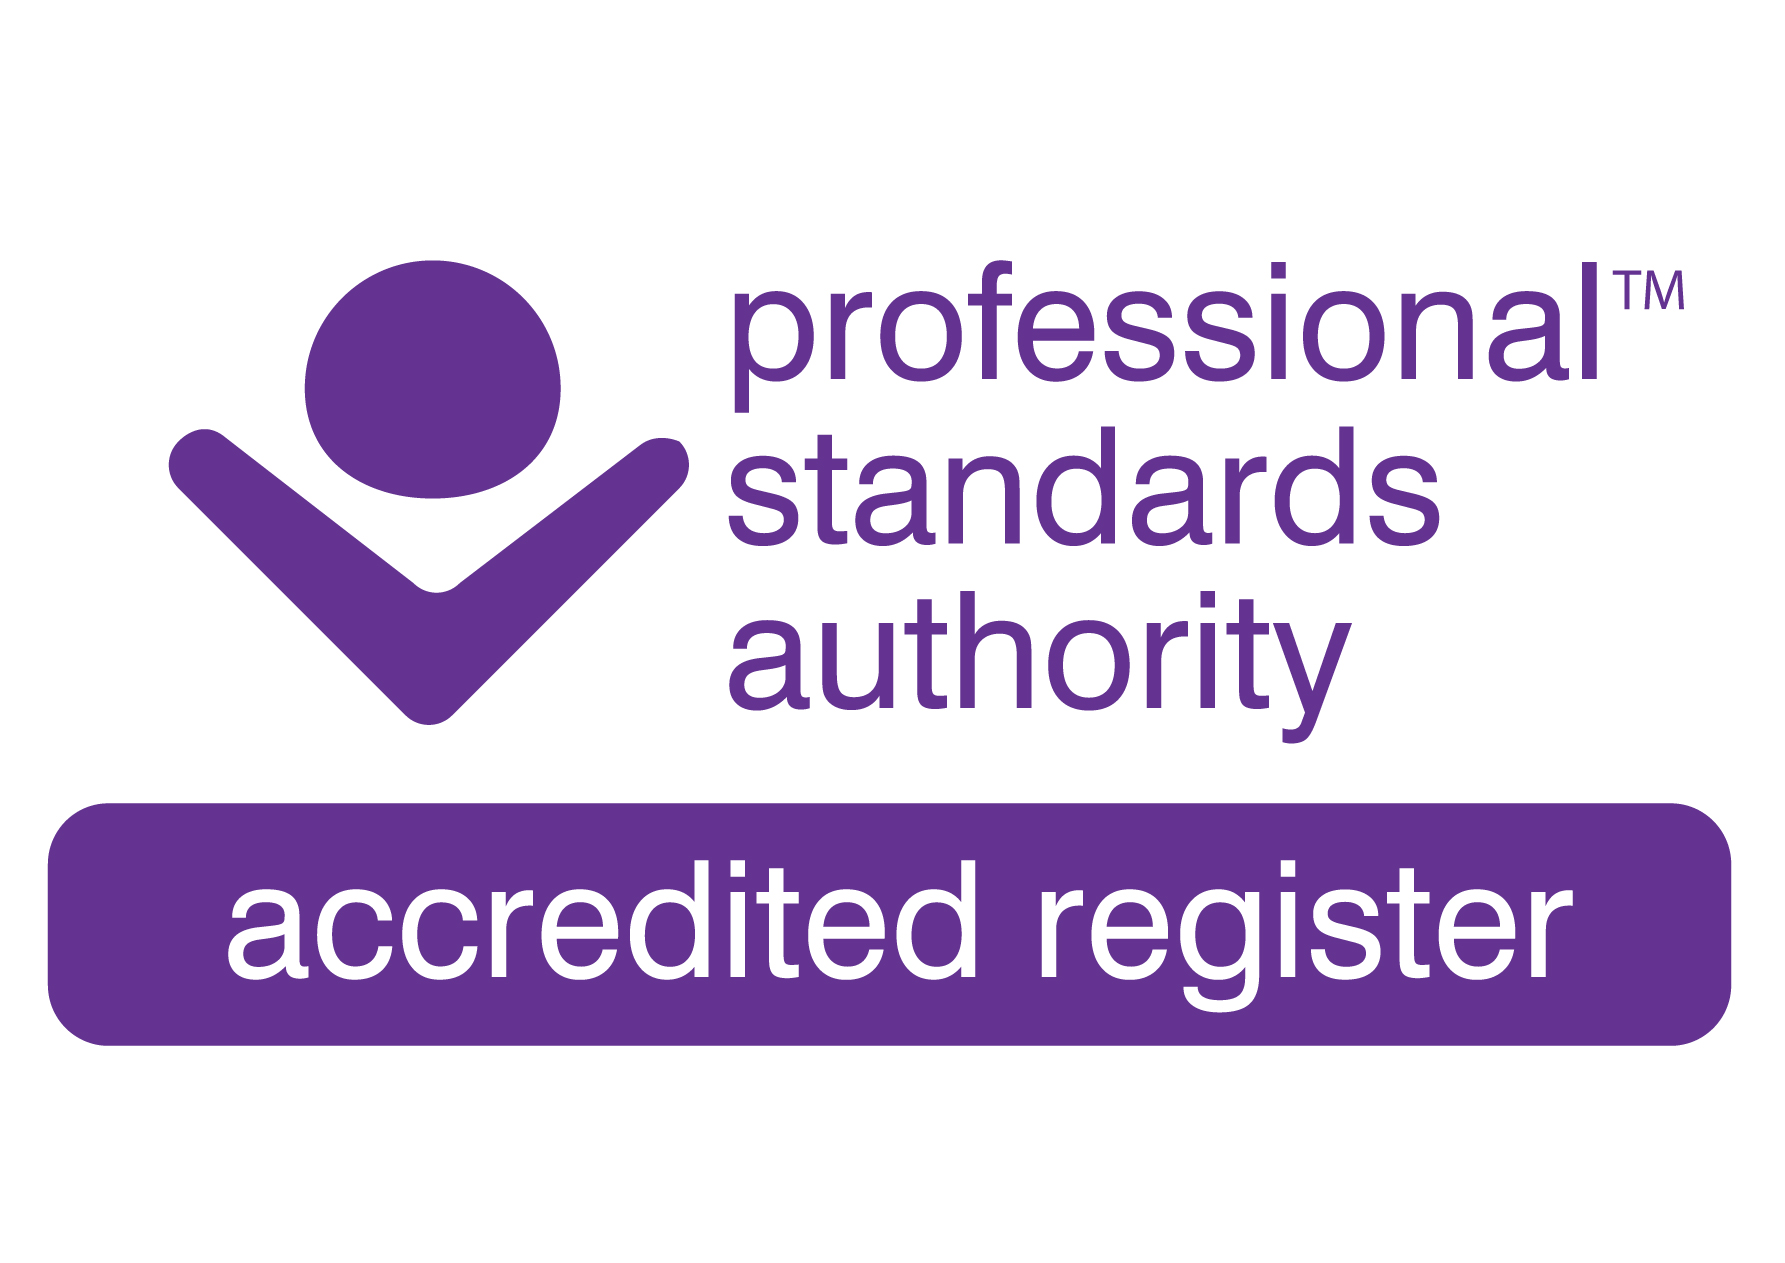 Accredited Registers mark large